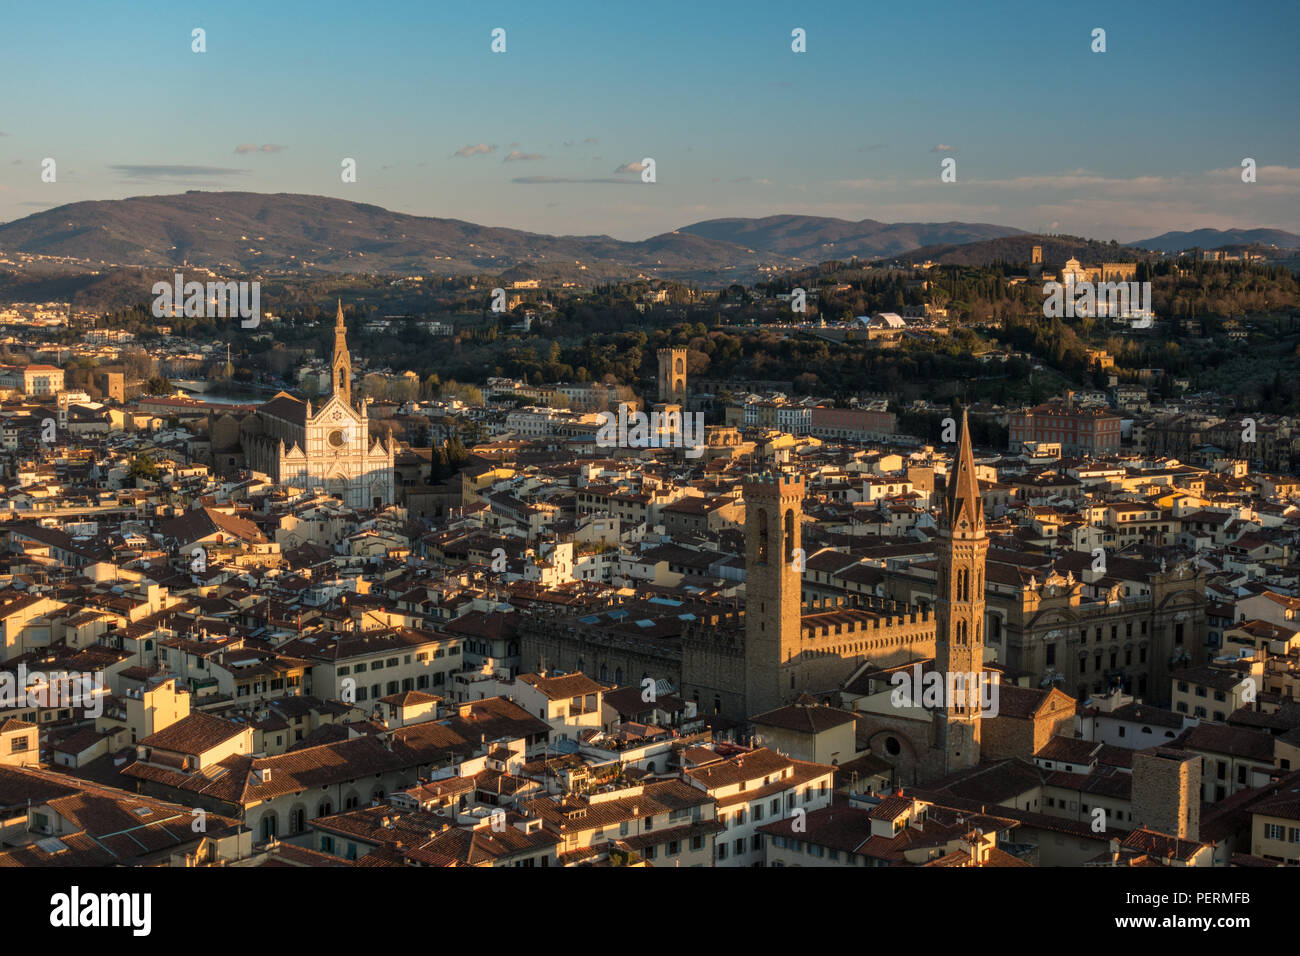 Florence, Italy - March 23, 2018: Evening light illuminates the cityscape of Florence, including the Bargello Tower and Basilica di Santa Croce church Stock Photo